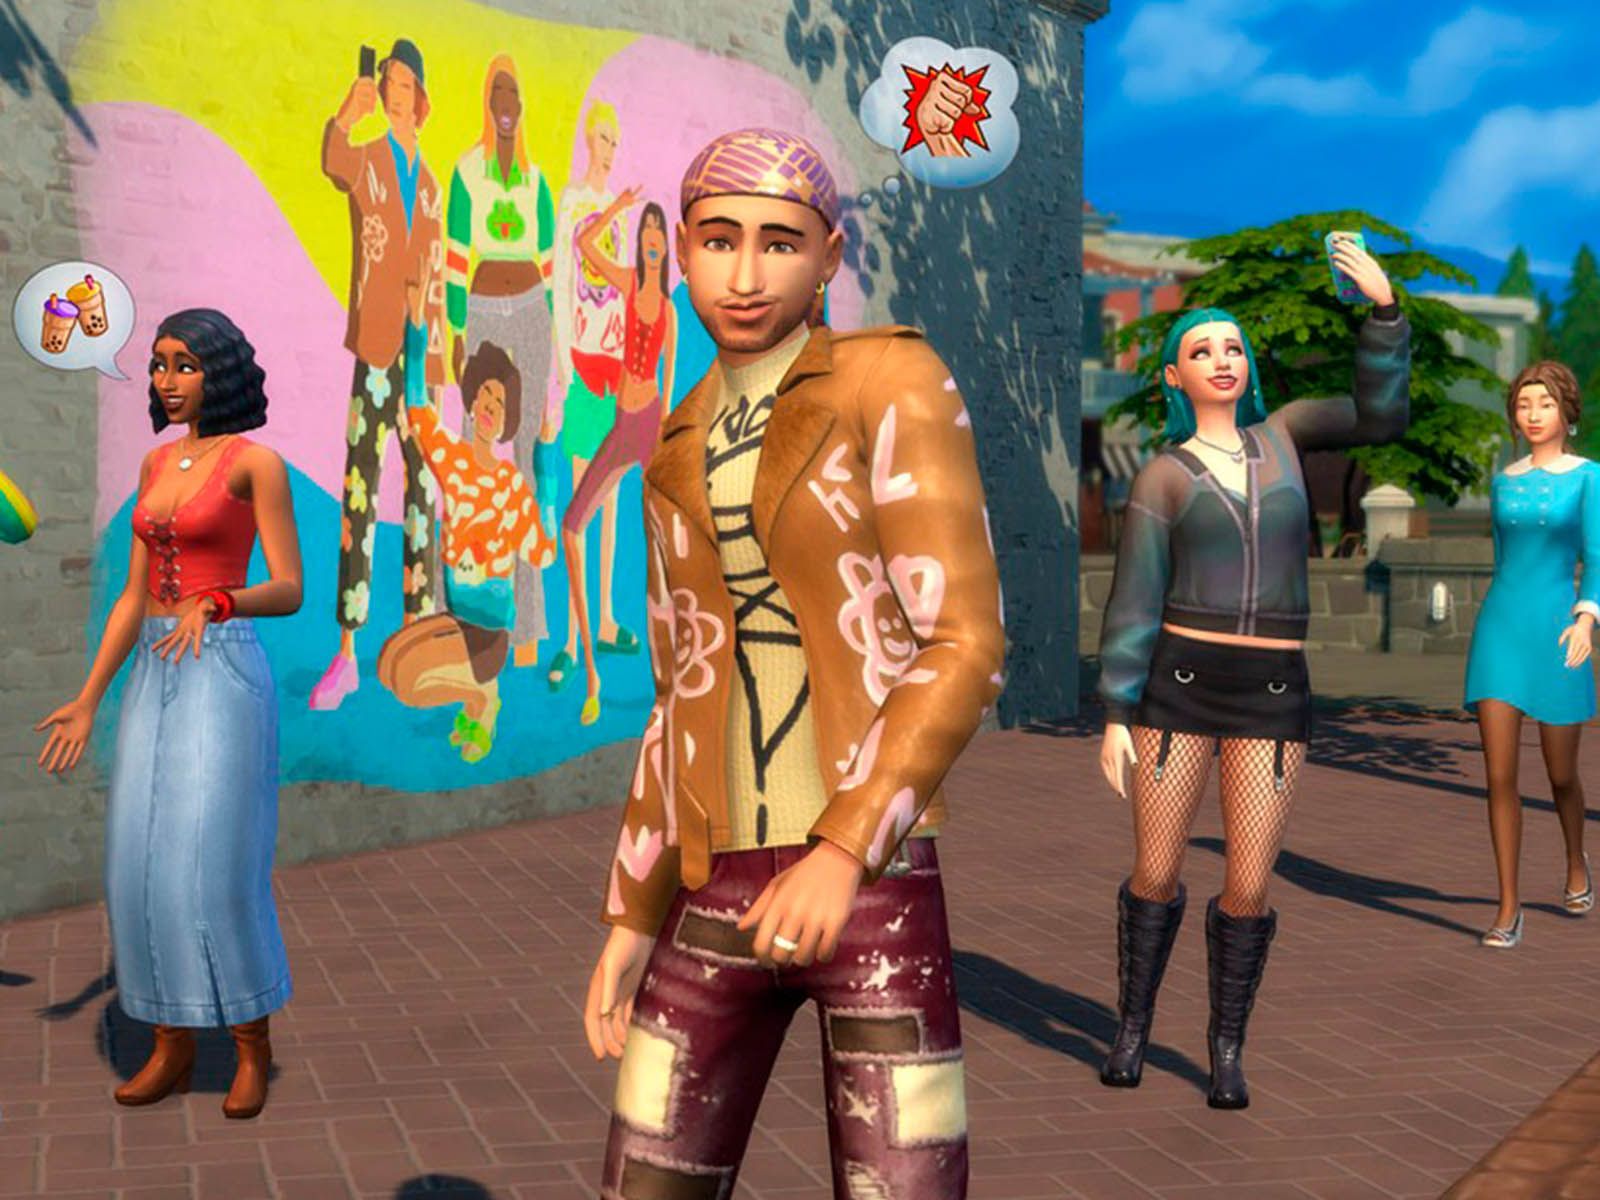 Second-hand fashion lands in The Sims with Depop